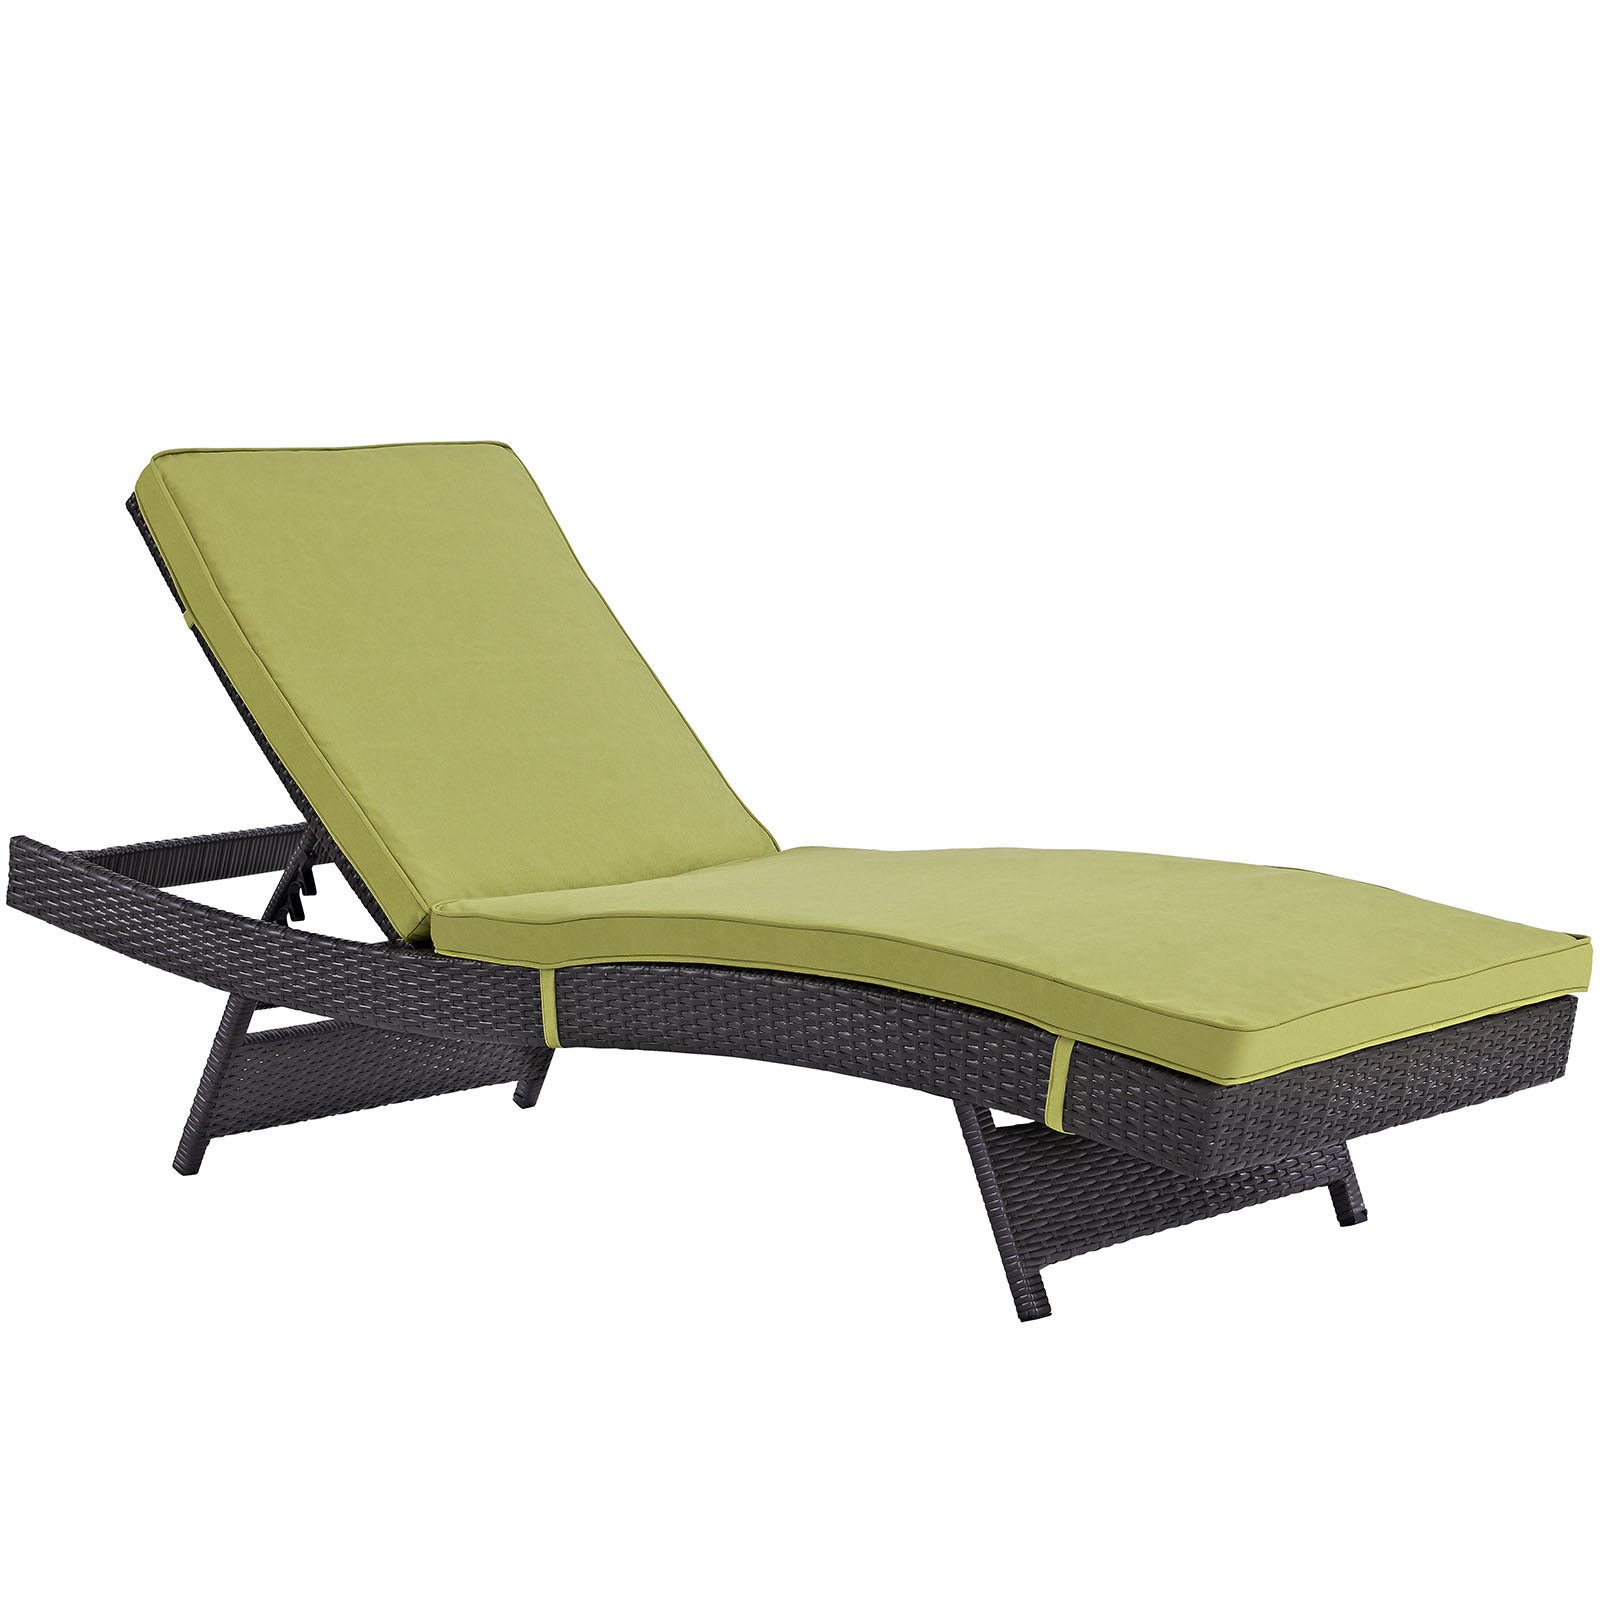 Modway Convene Chaise Outdoor Patio Set of 6 in Espresso Peridot - image 3 of 5